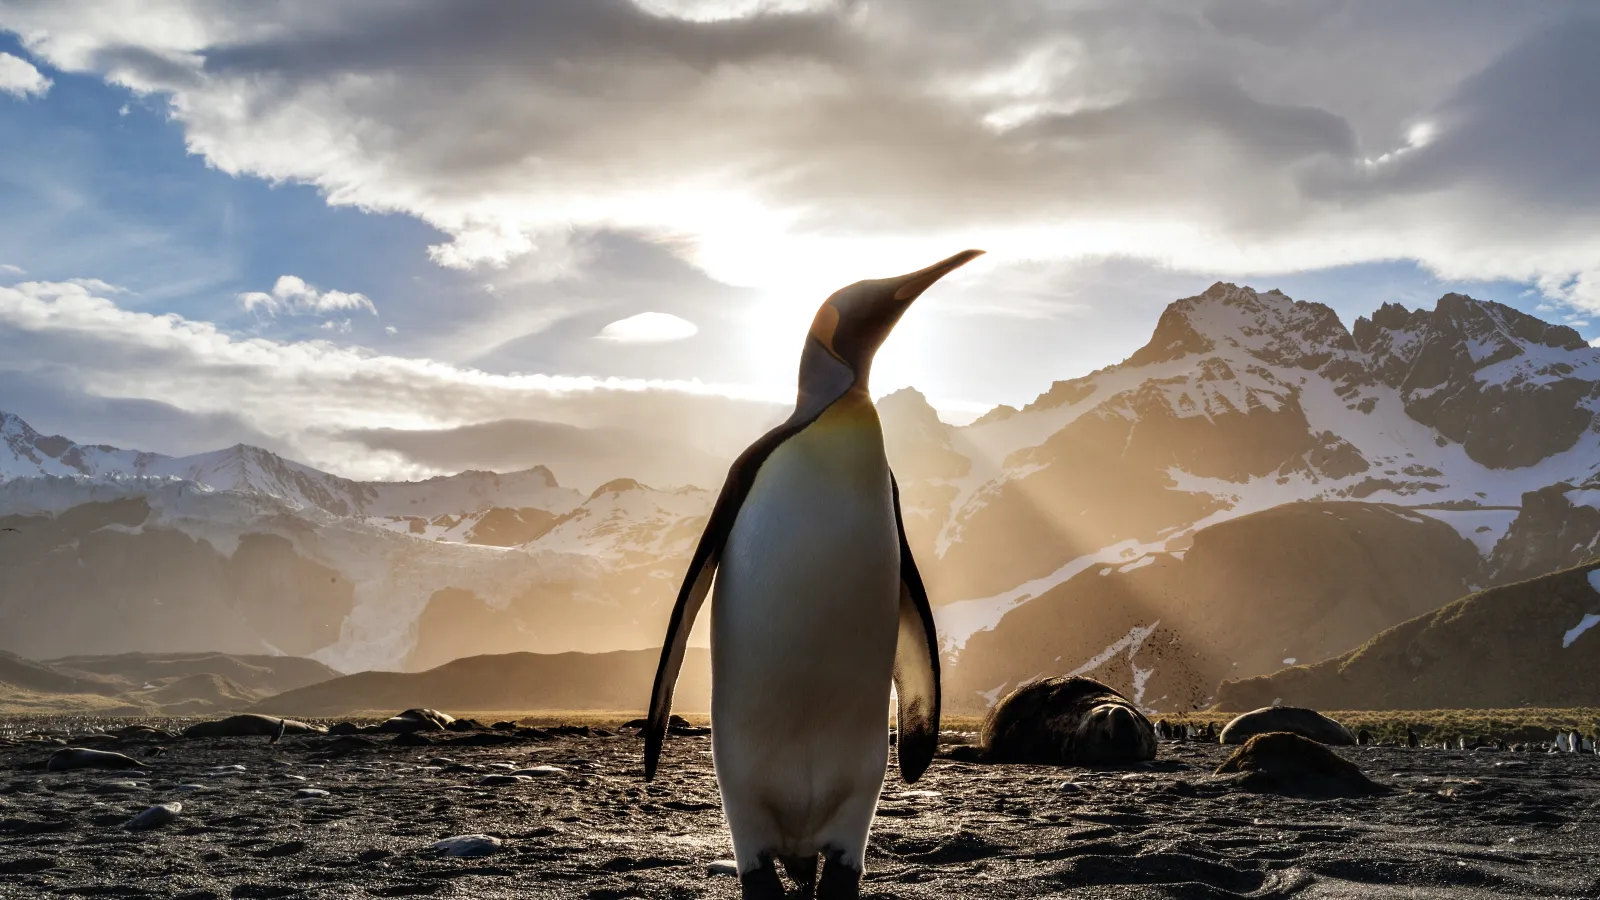 a penguin standing on a rocky surface with mountains in the background